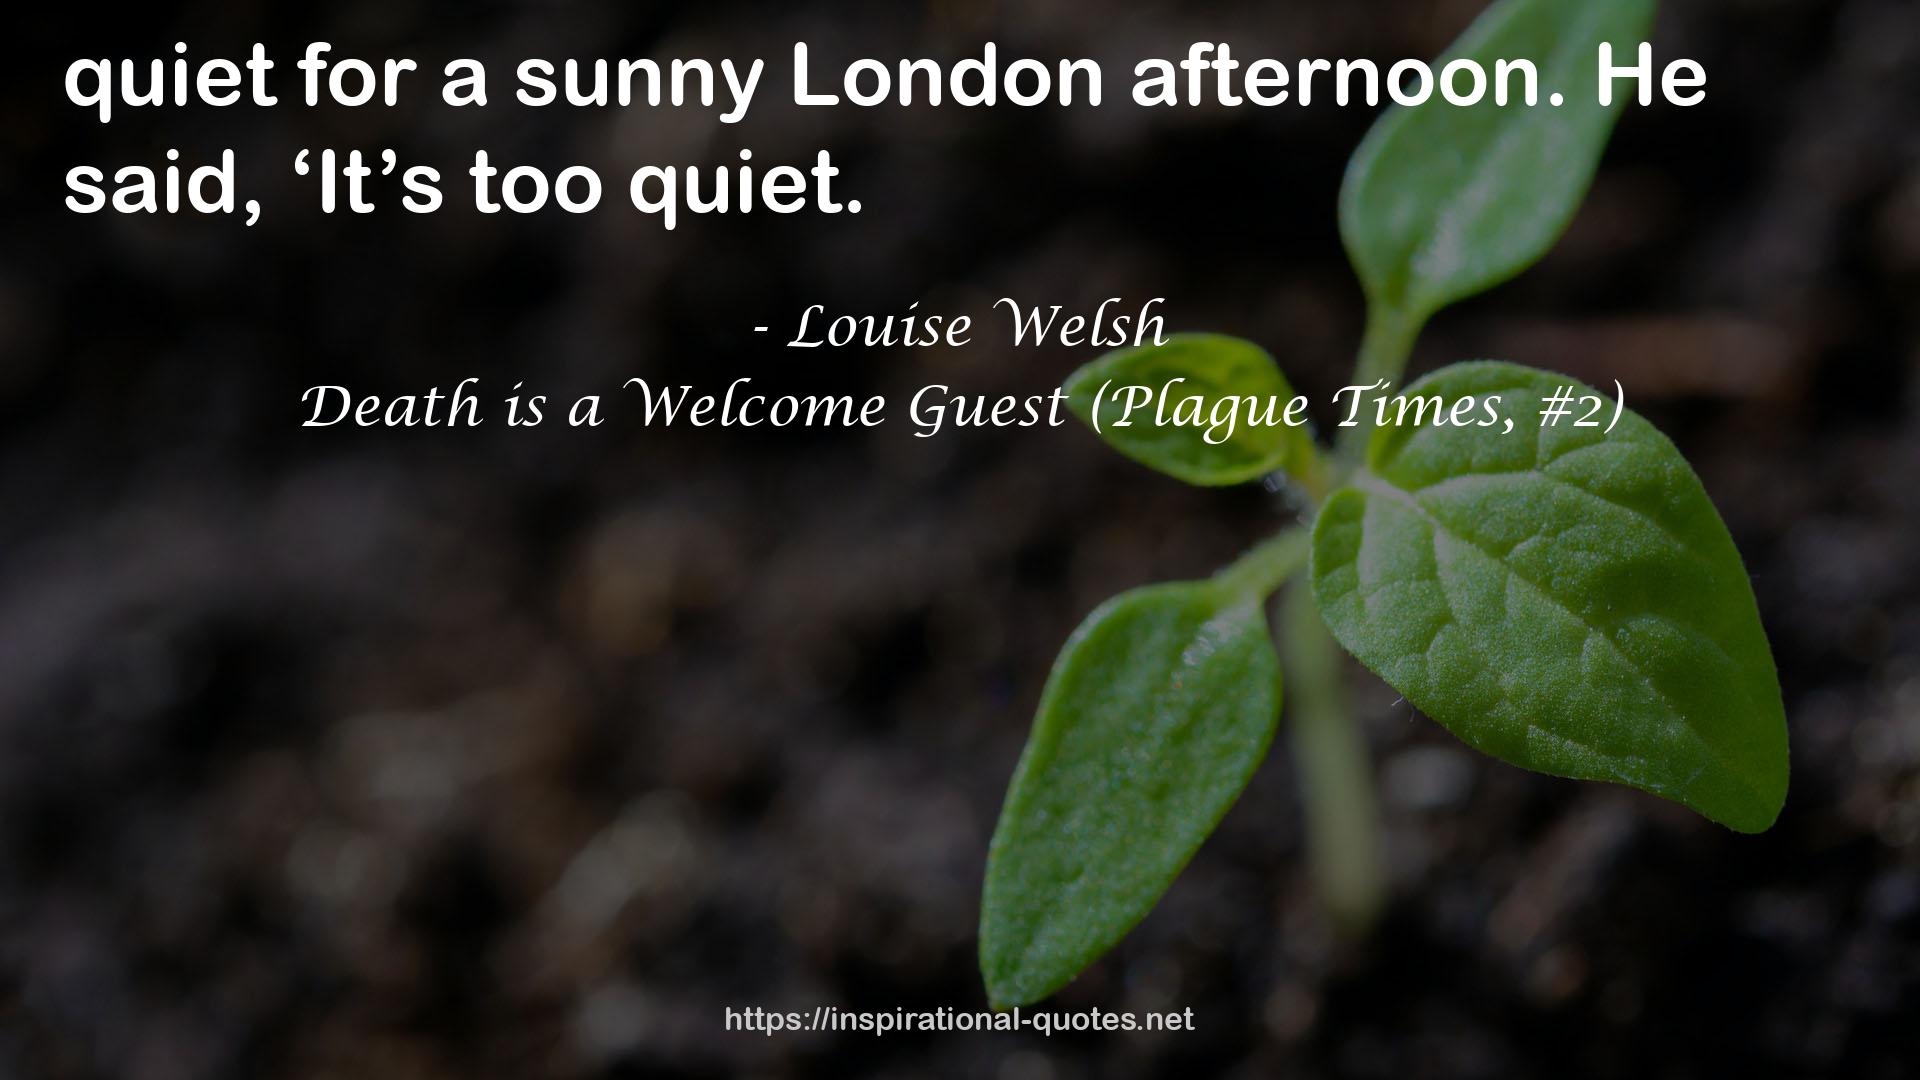 Death is a Welcome Guest (Plague Times, #2) QUOTES